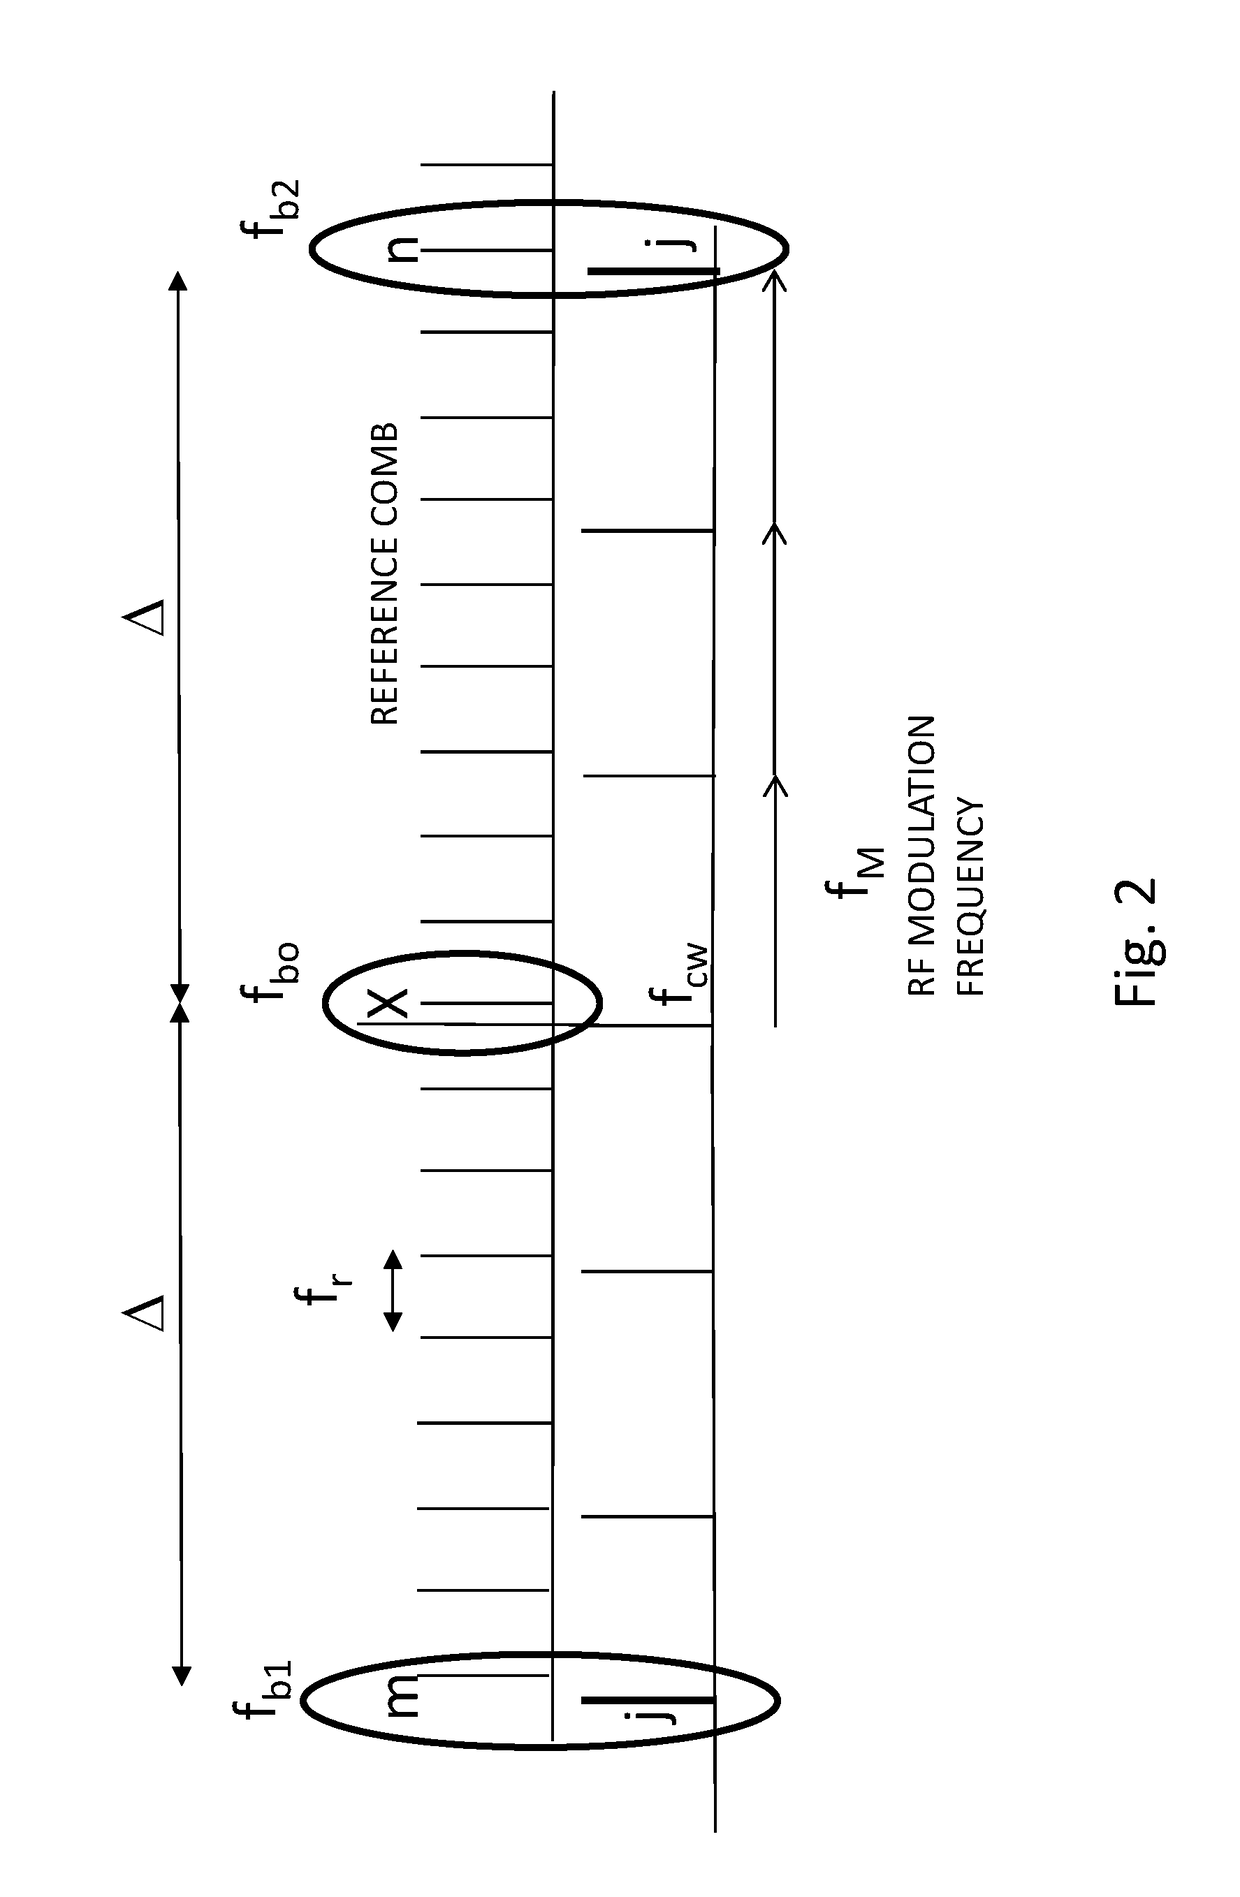 Systems and methods for low noise frequency multiplication, division, and synchronization